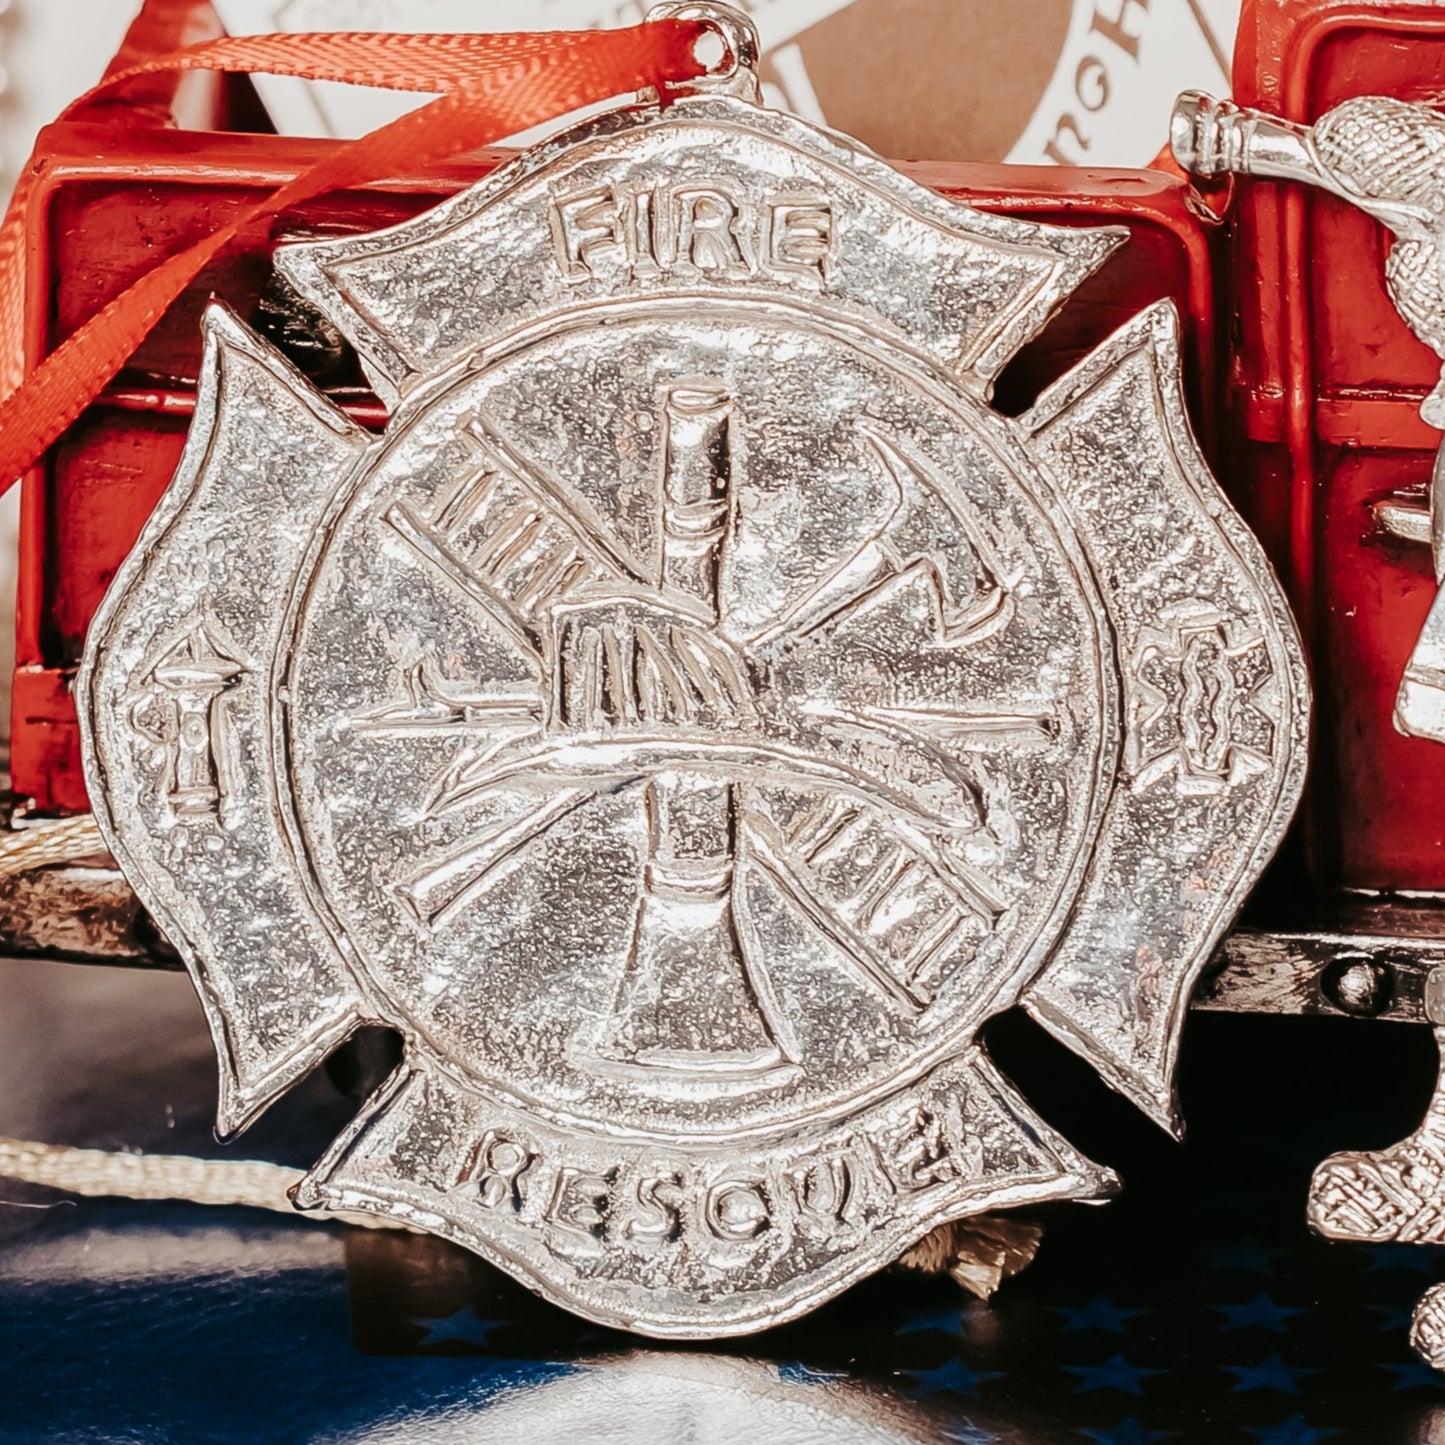 Firefighter Ornaments - Fireman - Fire Badge - Fire Truck - Fire and Rescue Gifts